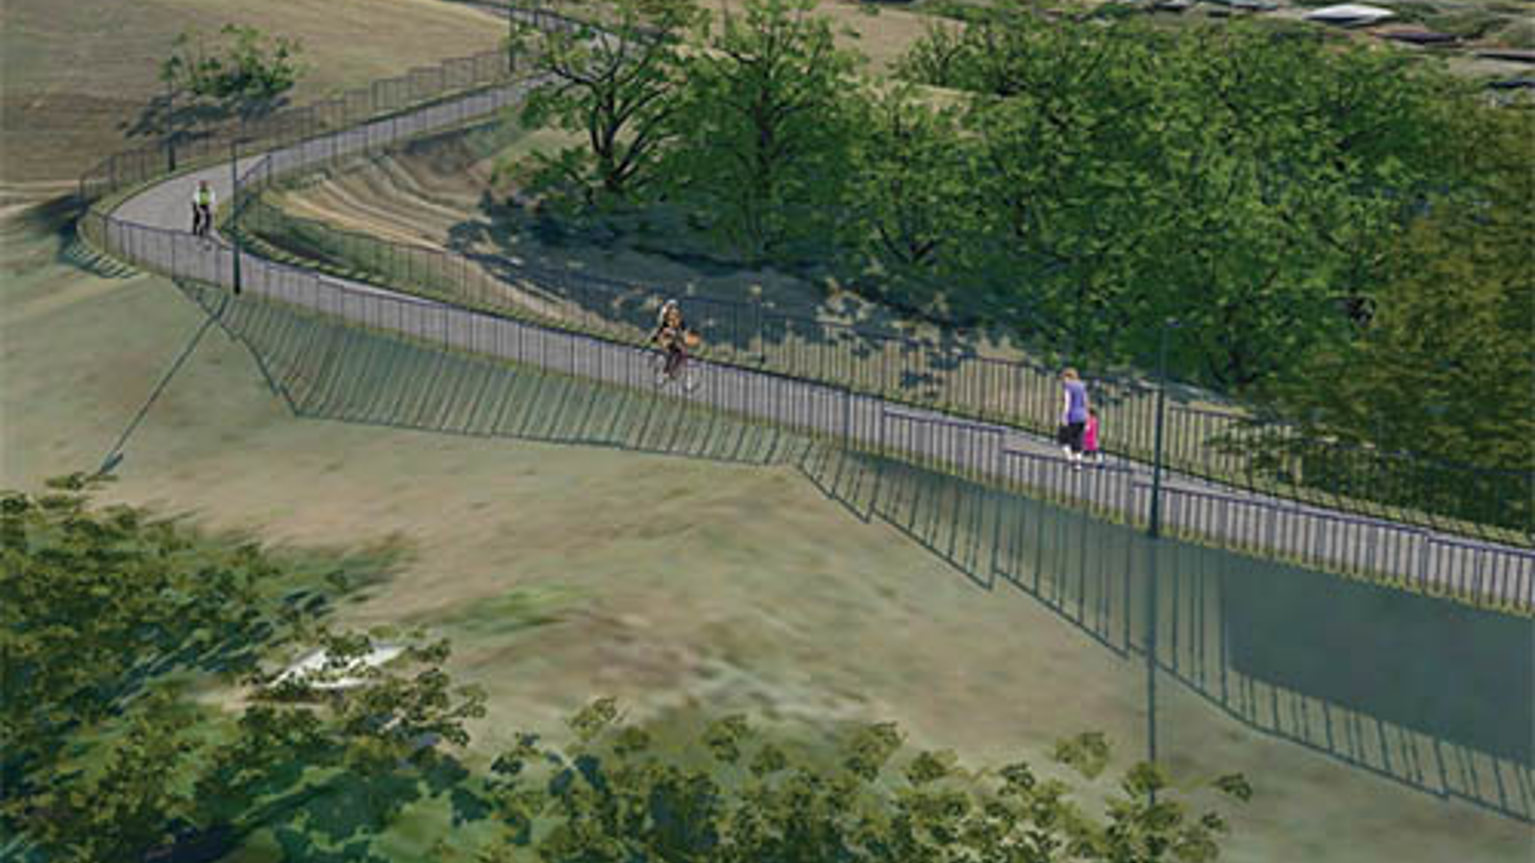 A view looking down on the path winding around a bend. People walk along the easy flat surface. There are barriers to either side of this path.